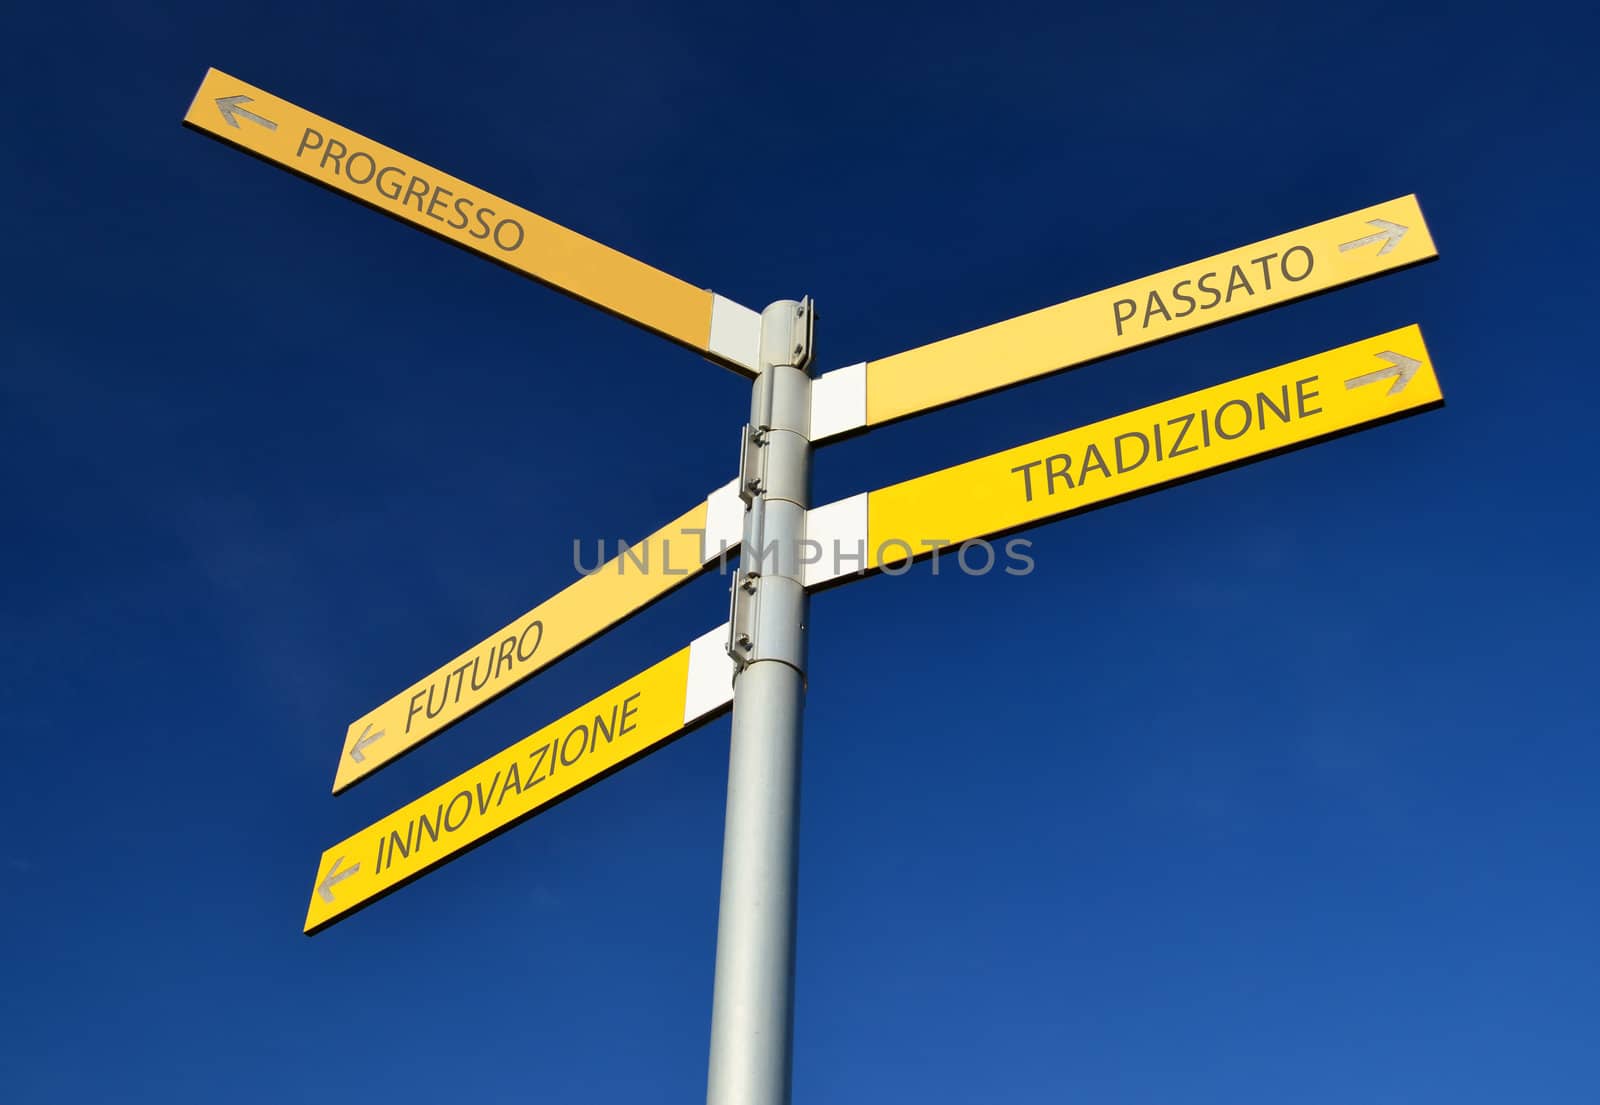 Direction signs in italian: future, innovation, technology, progress or tradition, past